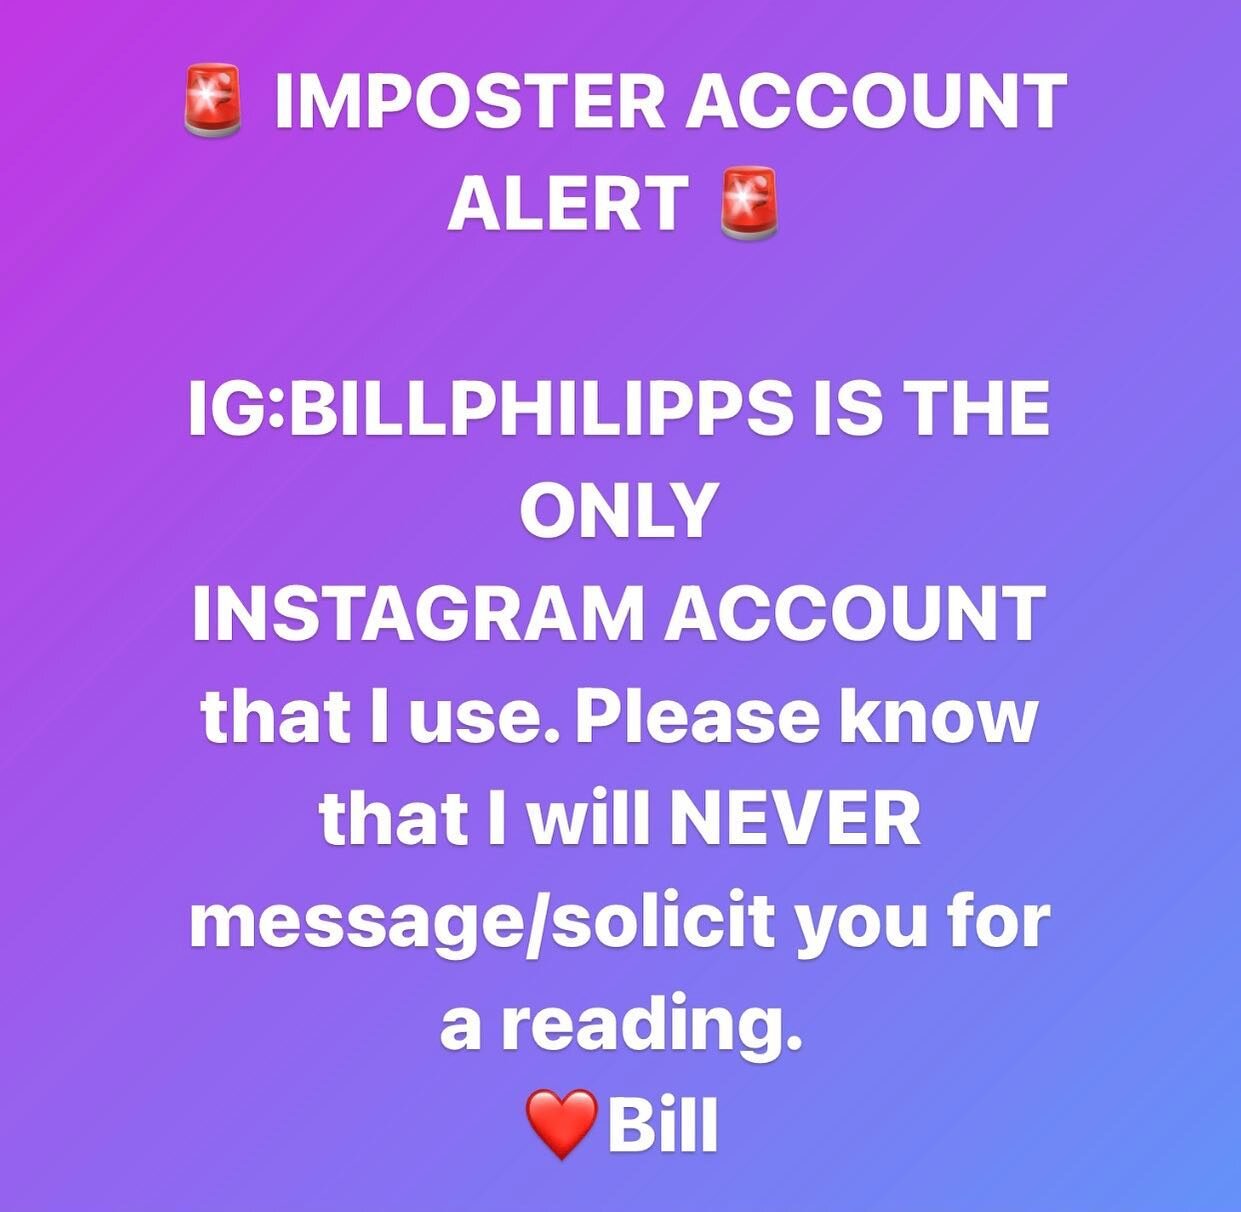 I have received numerous messages lately about imposter accounts. This has been ongoing for the past year and is unfortunate. Please report anyone who claims to be me and solicits a reading from you. The only way that I will provide a private reading